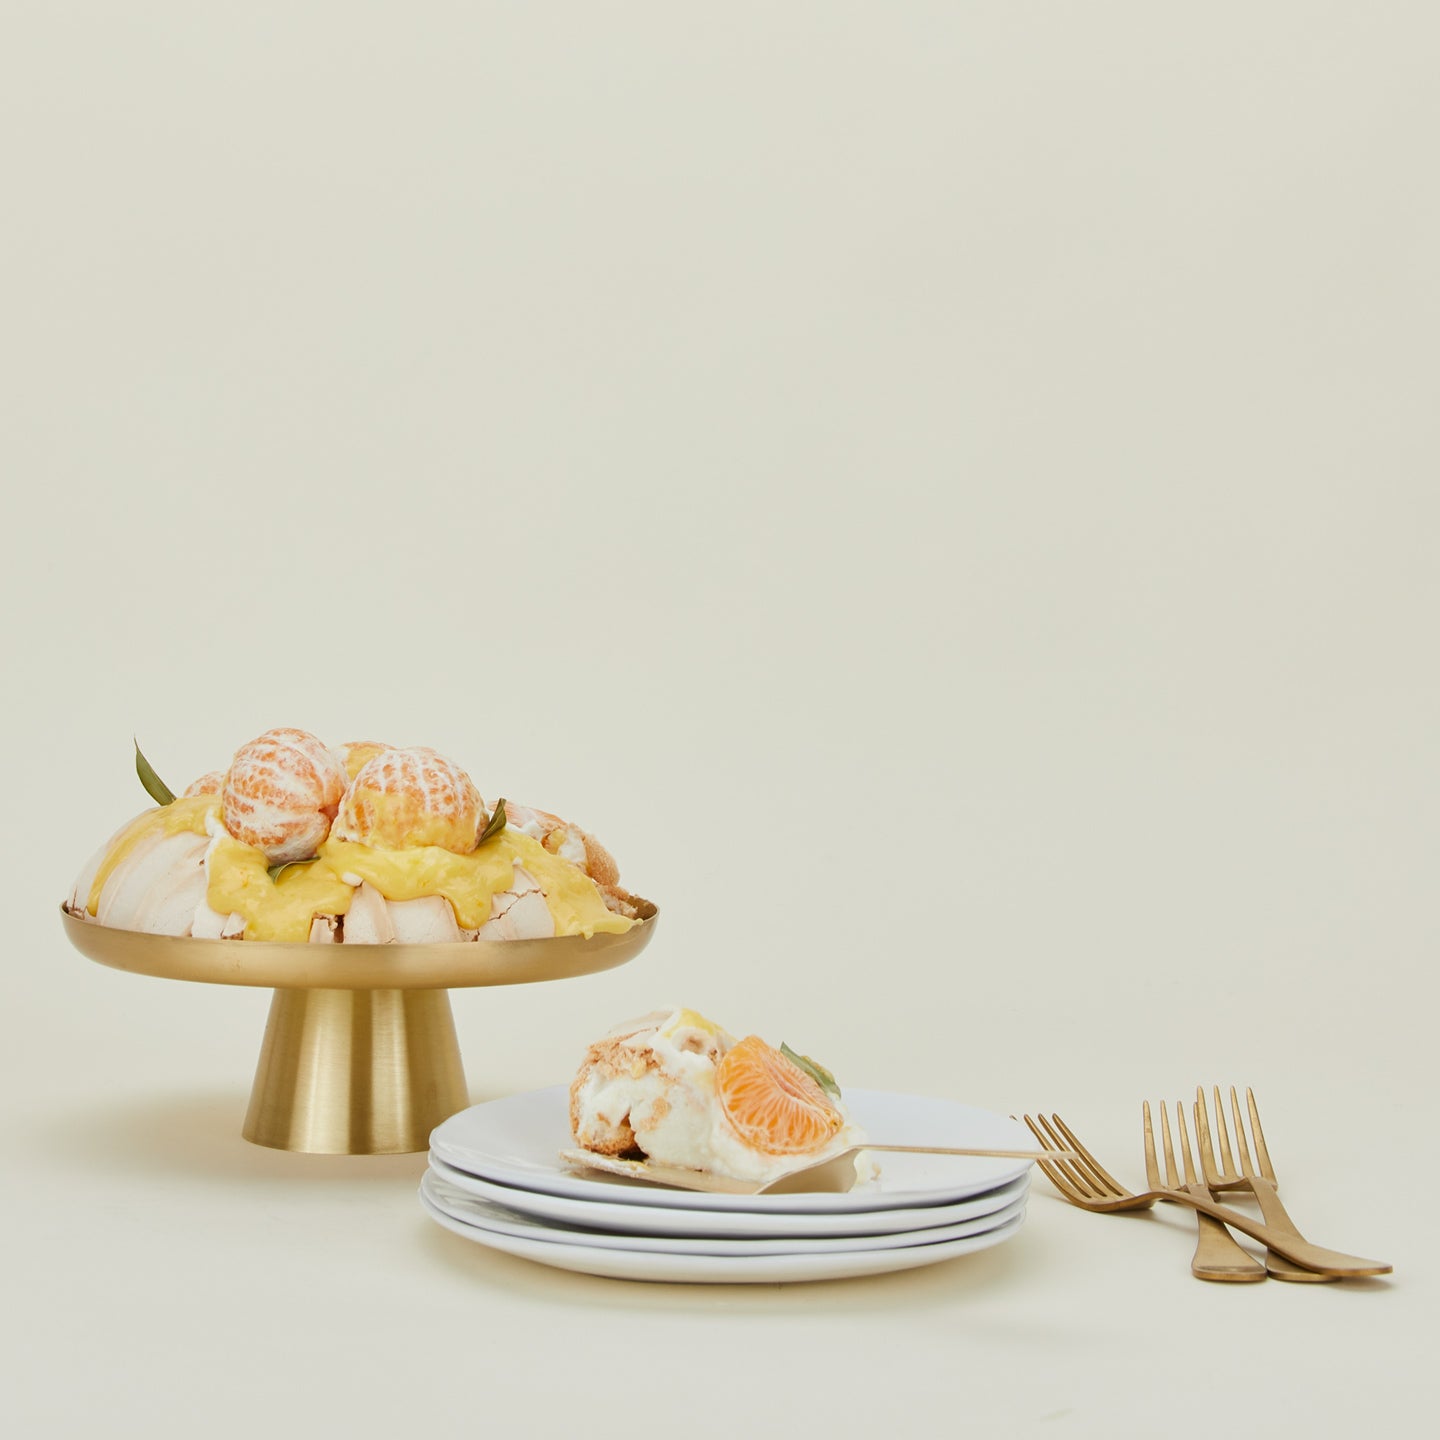 Brass Cake Stand with pavlova, stack of plates and bunch of forks.